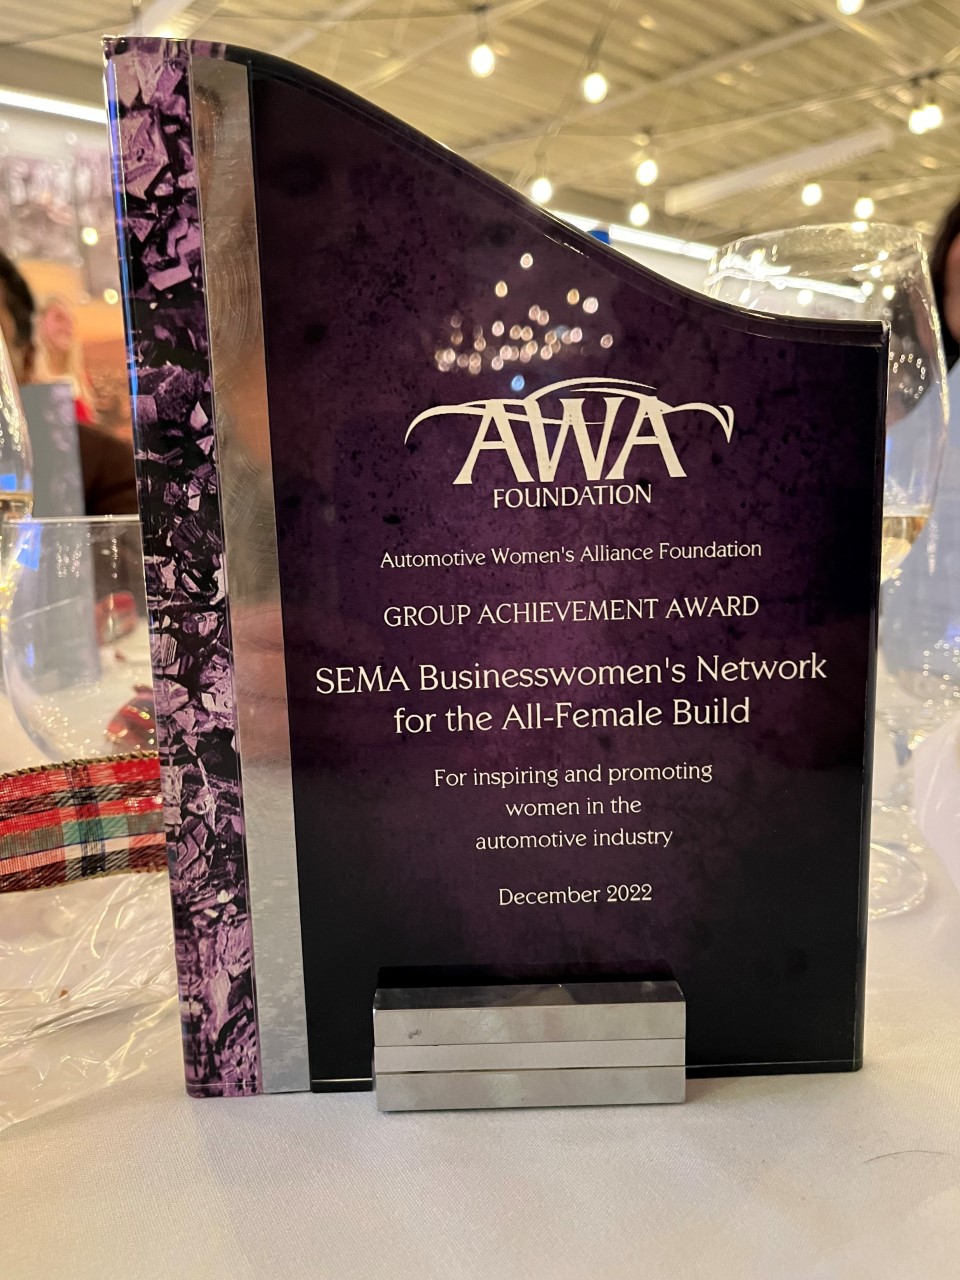 SBN Presented with AWA Foundation Group Achievement Award